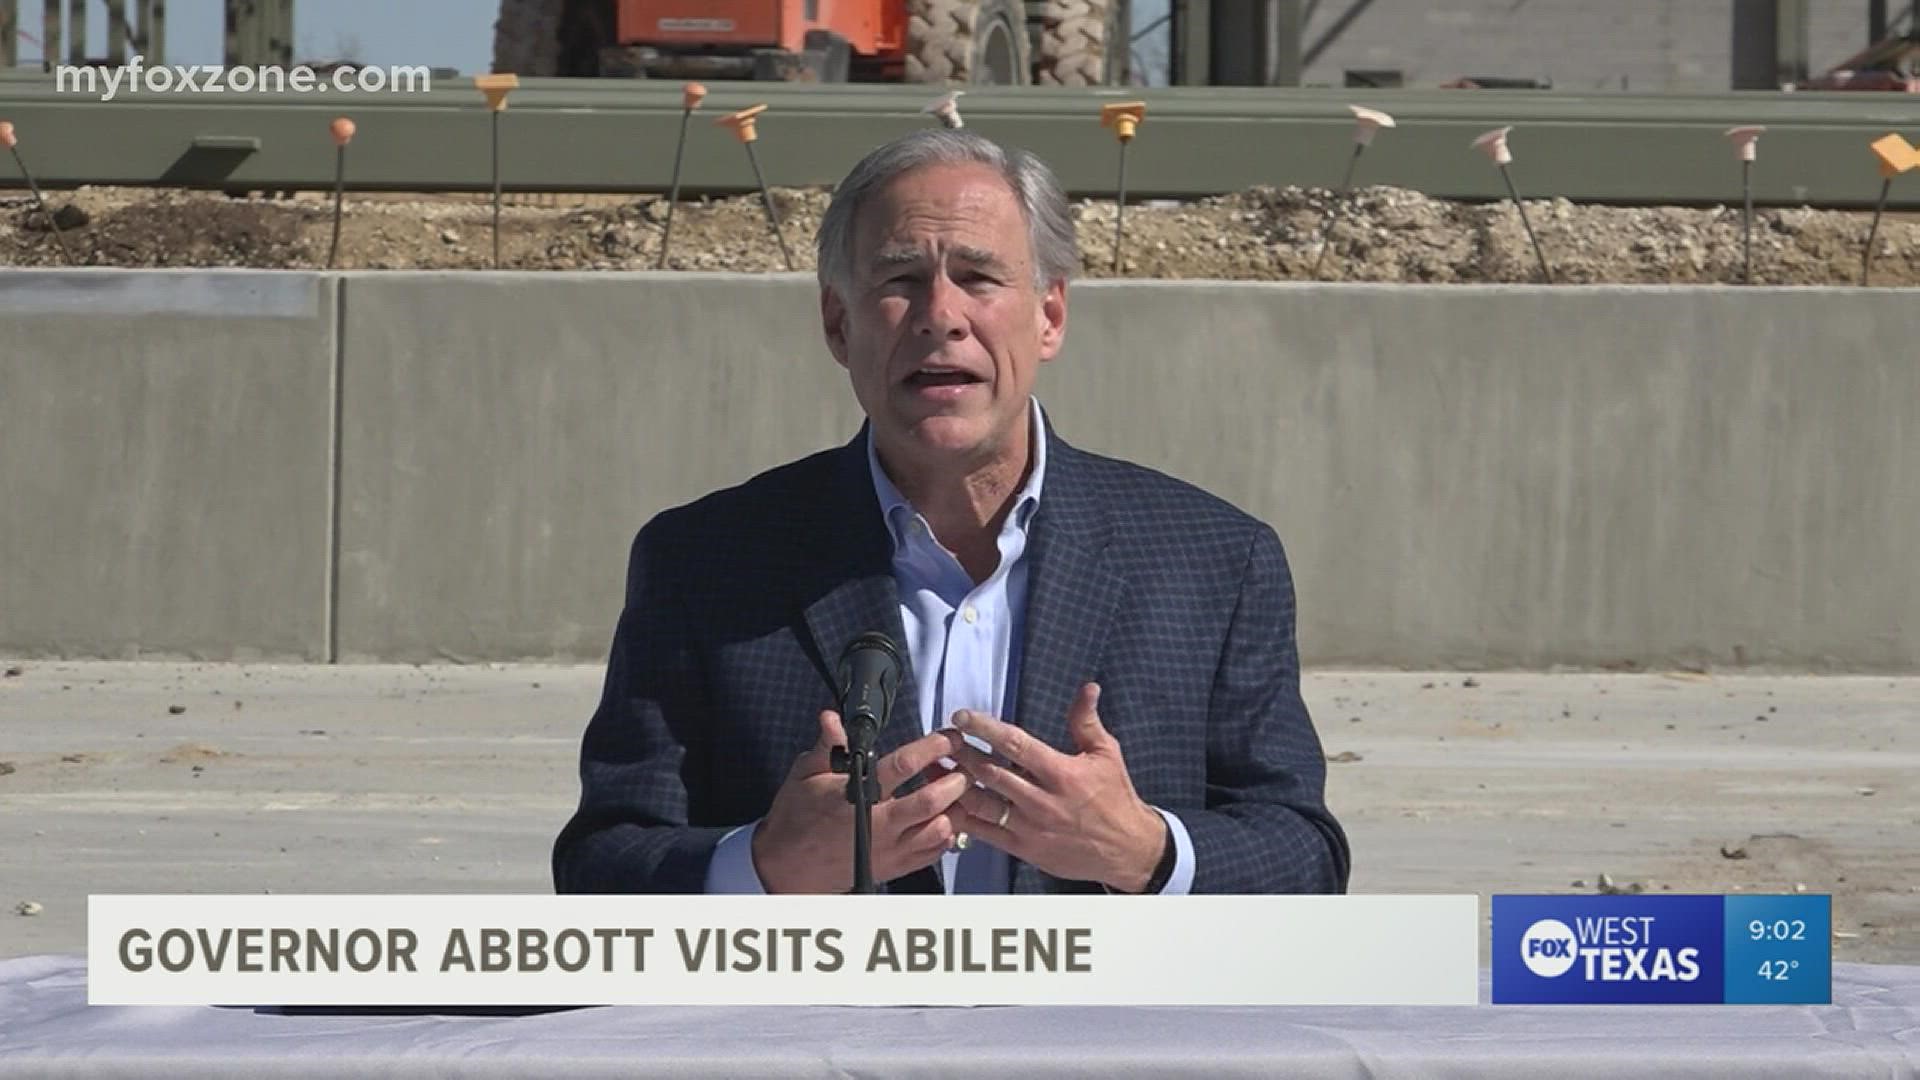 As development of the Great Lakes Cheese Facility continues, Gov. Abbott expressed his excitement for more economic development in Abilene.